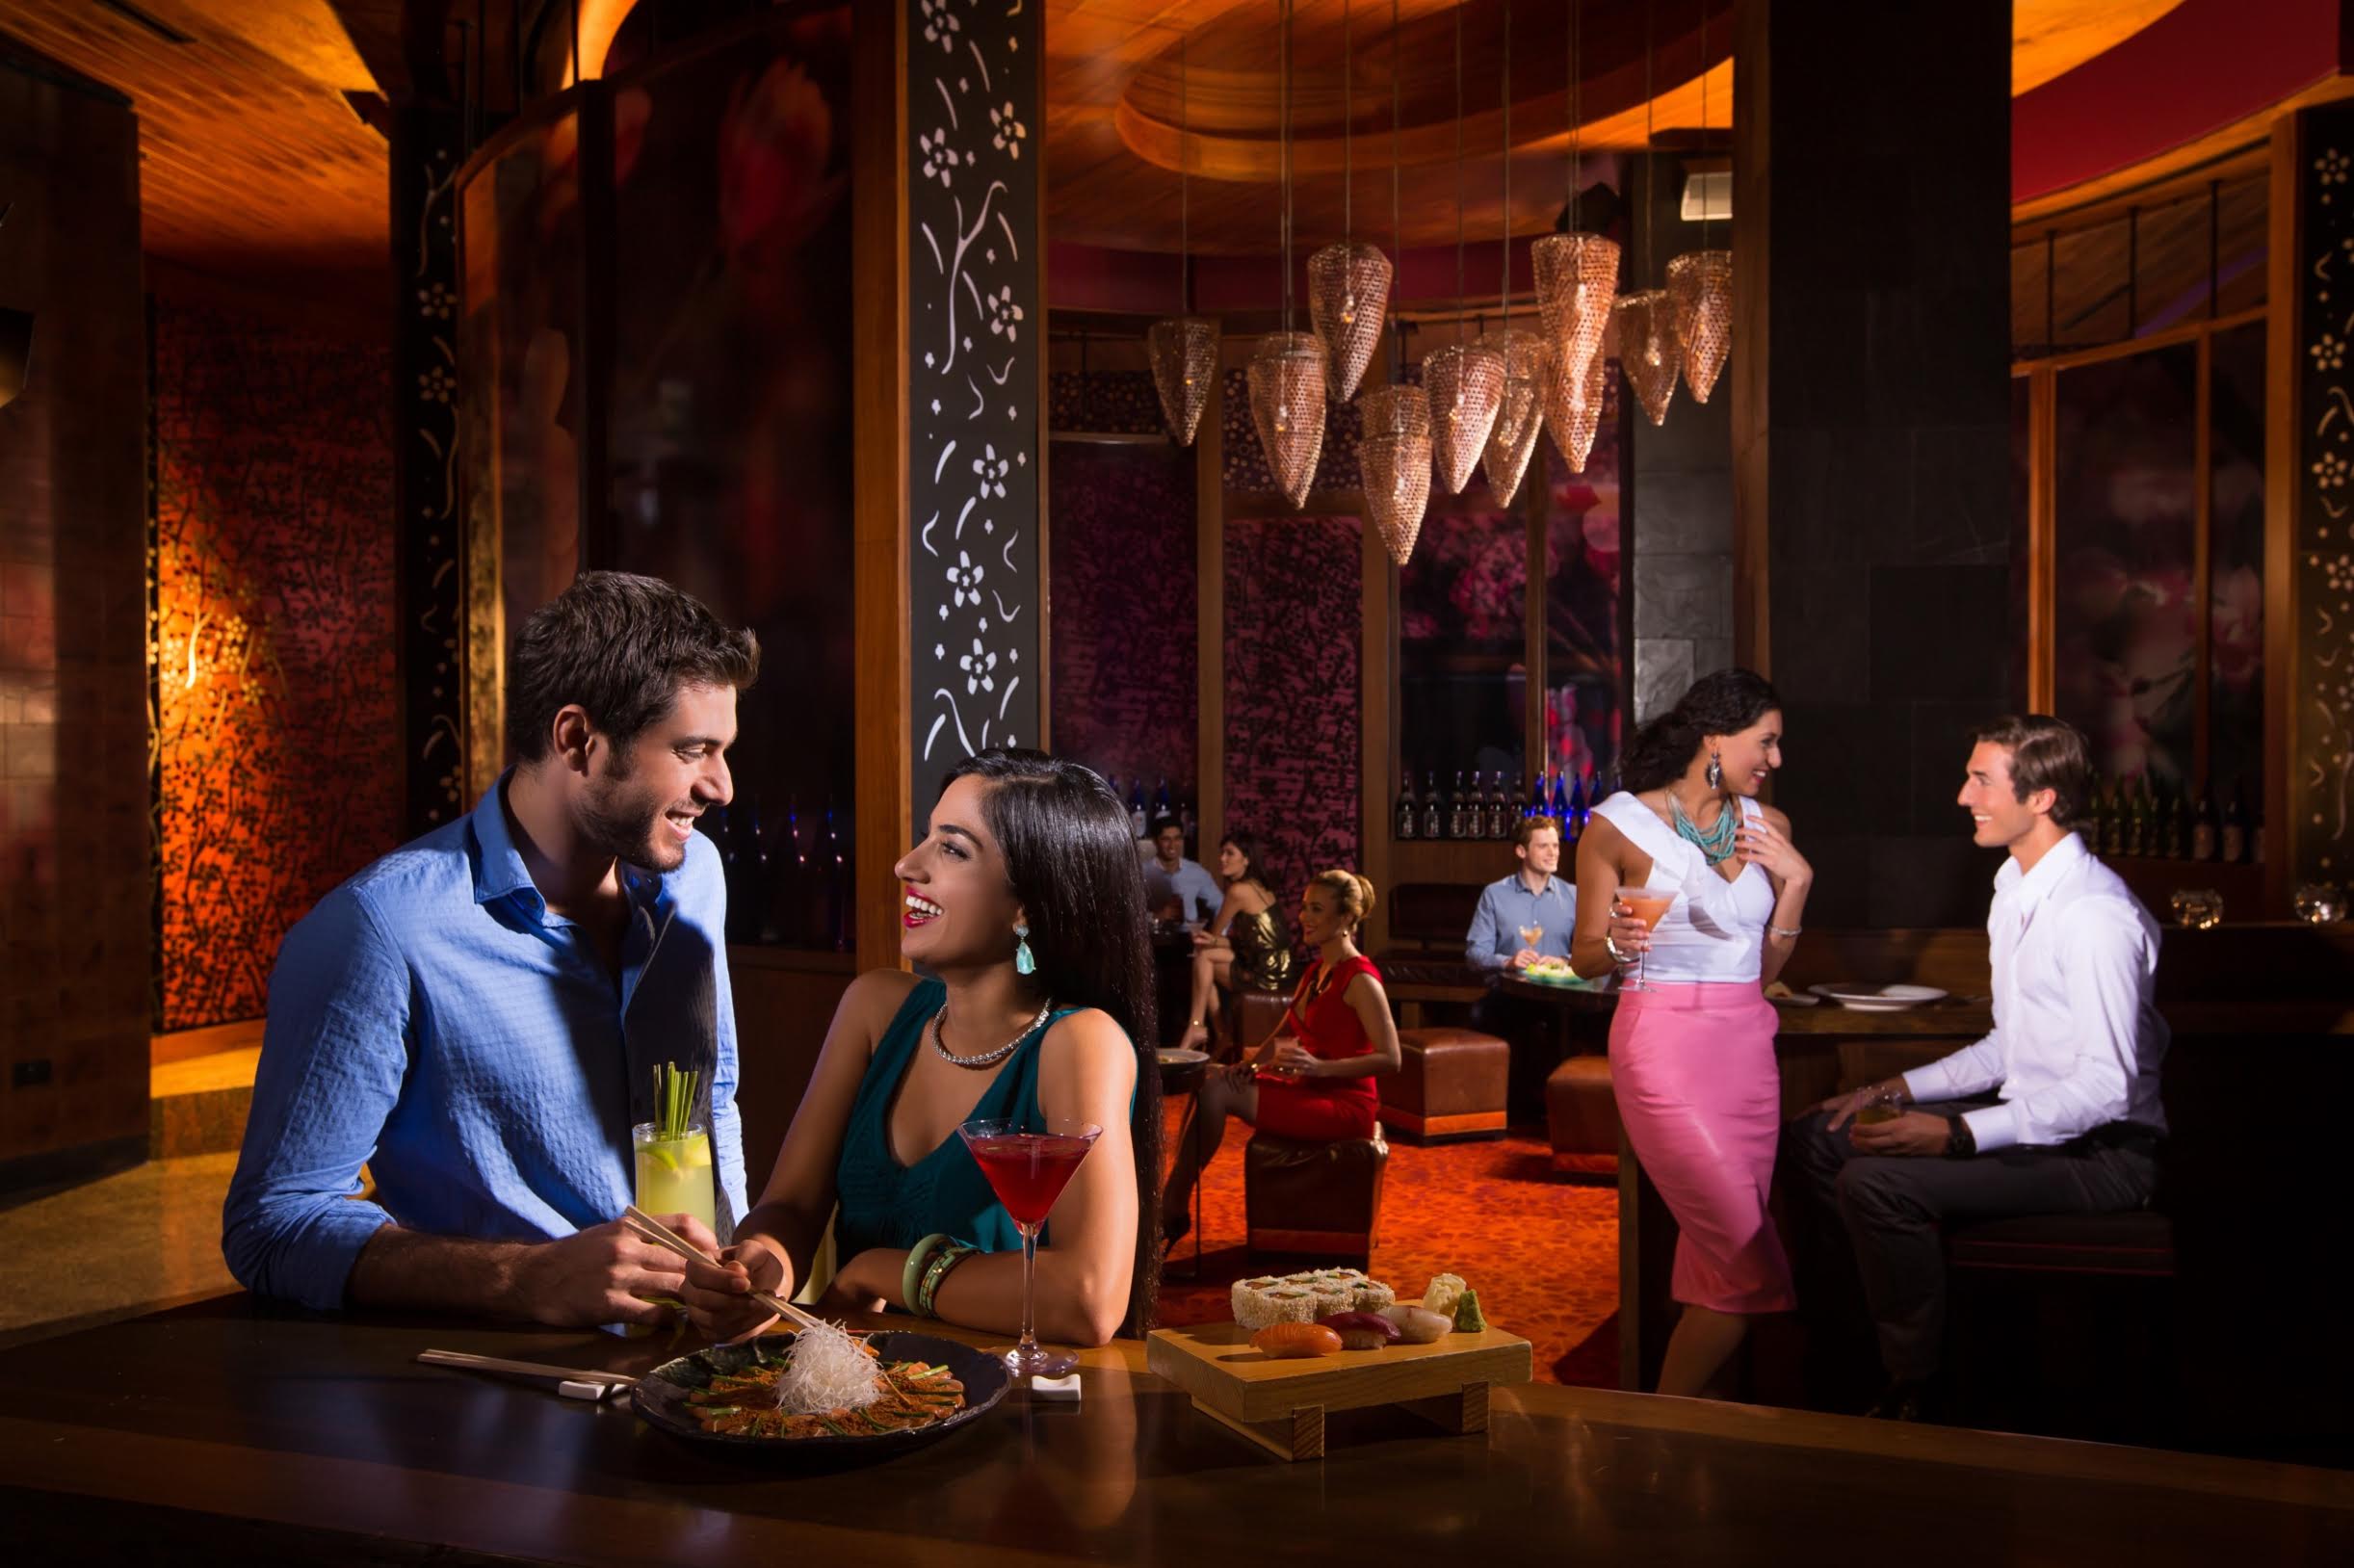 A gateway to bring you together at Atlantis, the Palm Dubai - LUXE LIFE ...